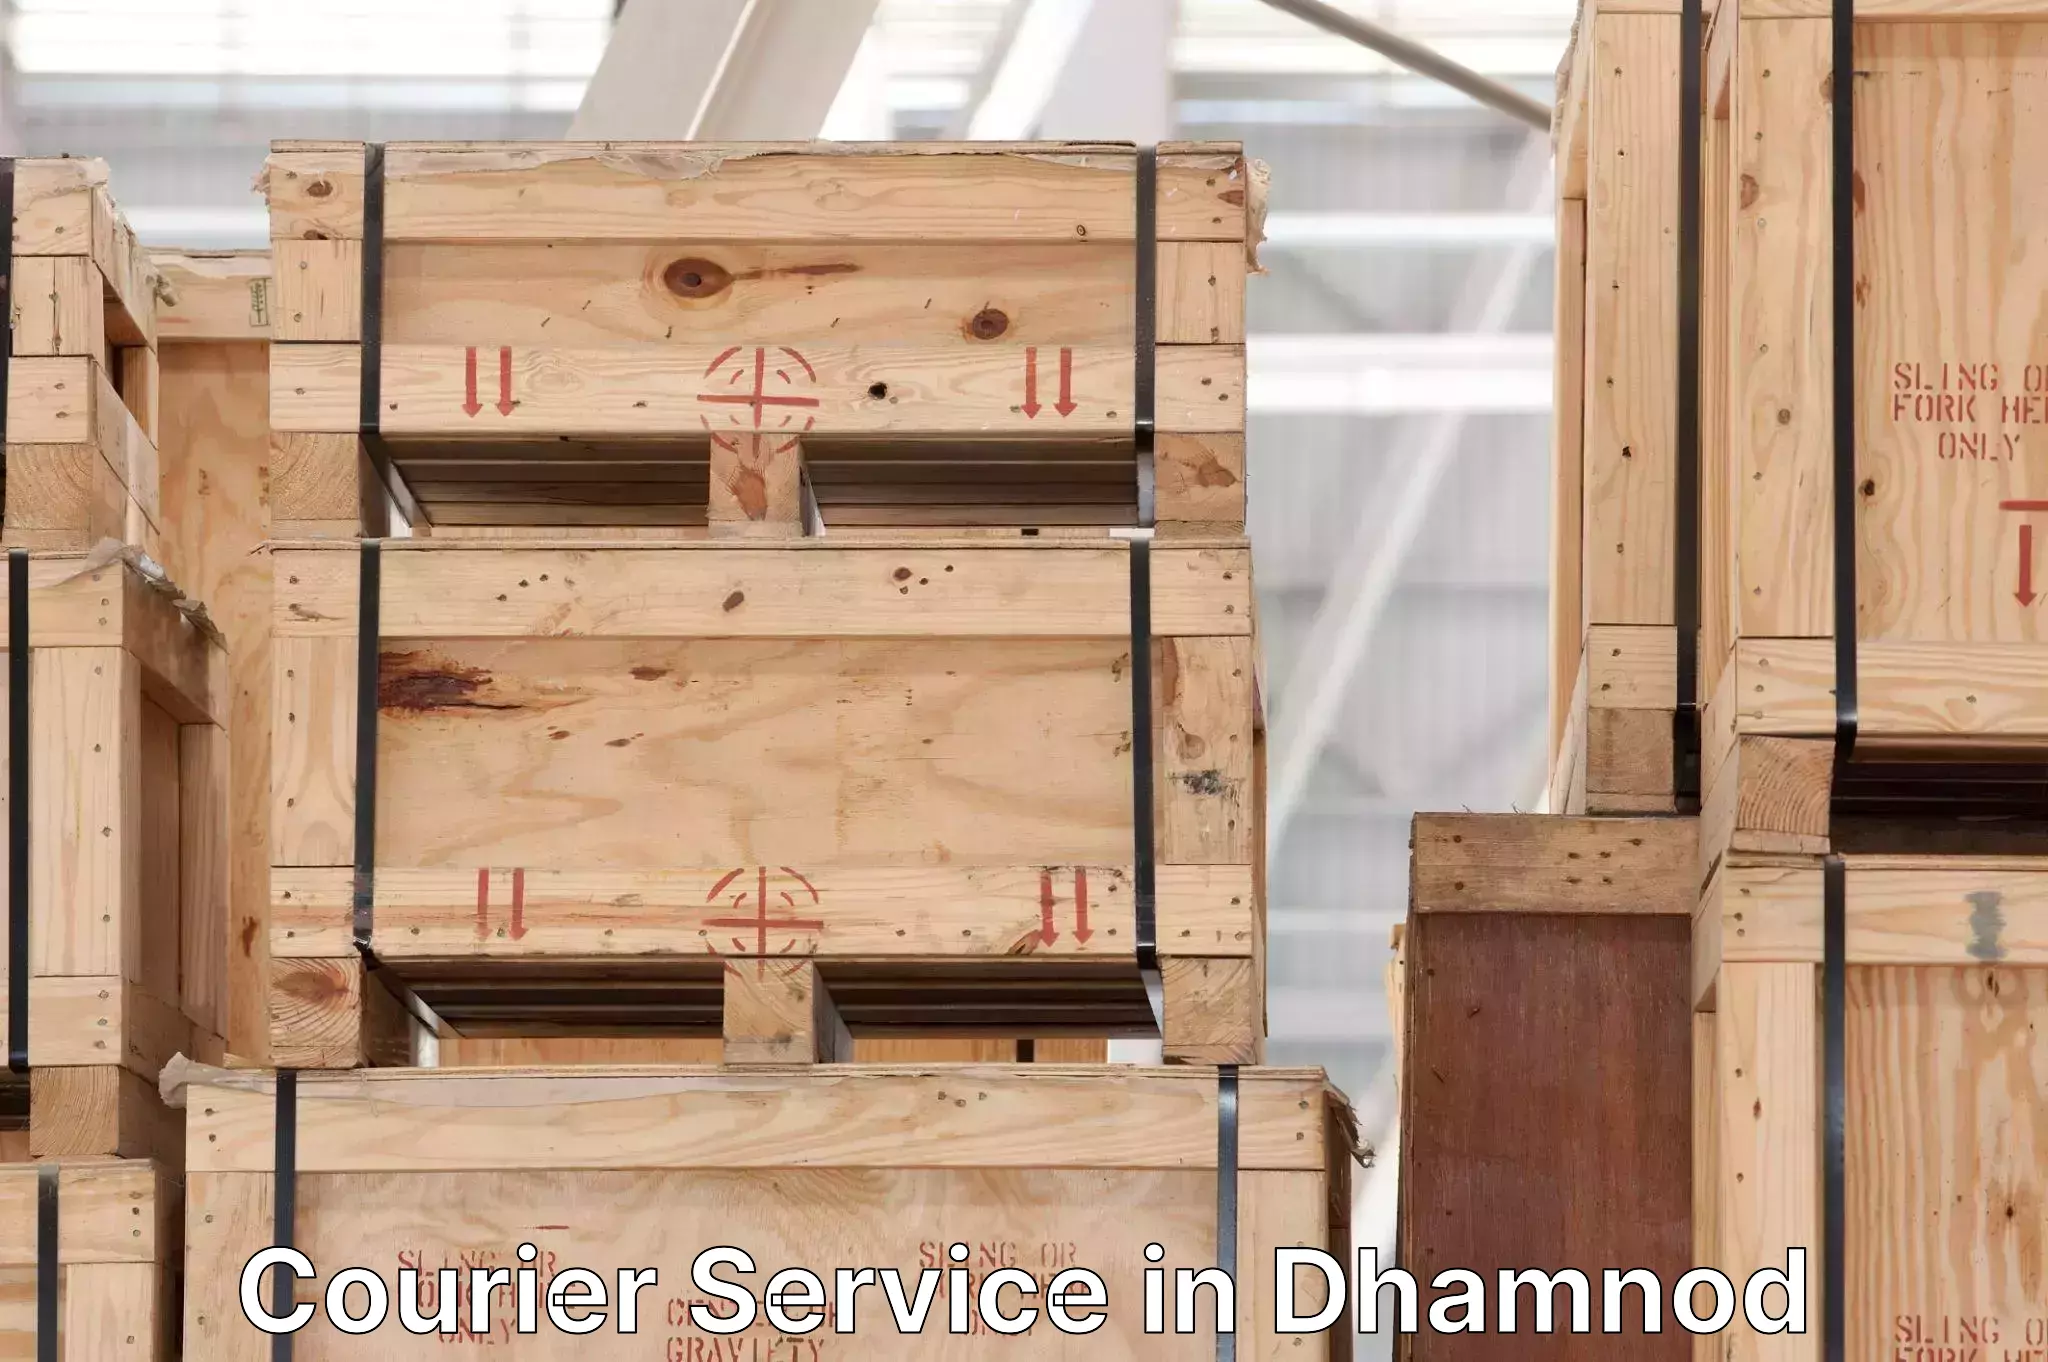 24/7 courier service in Dhamnod